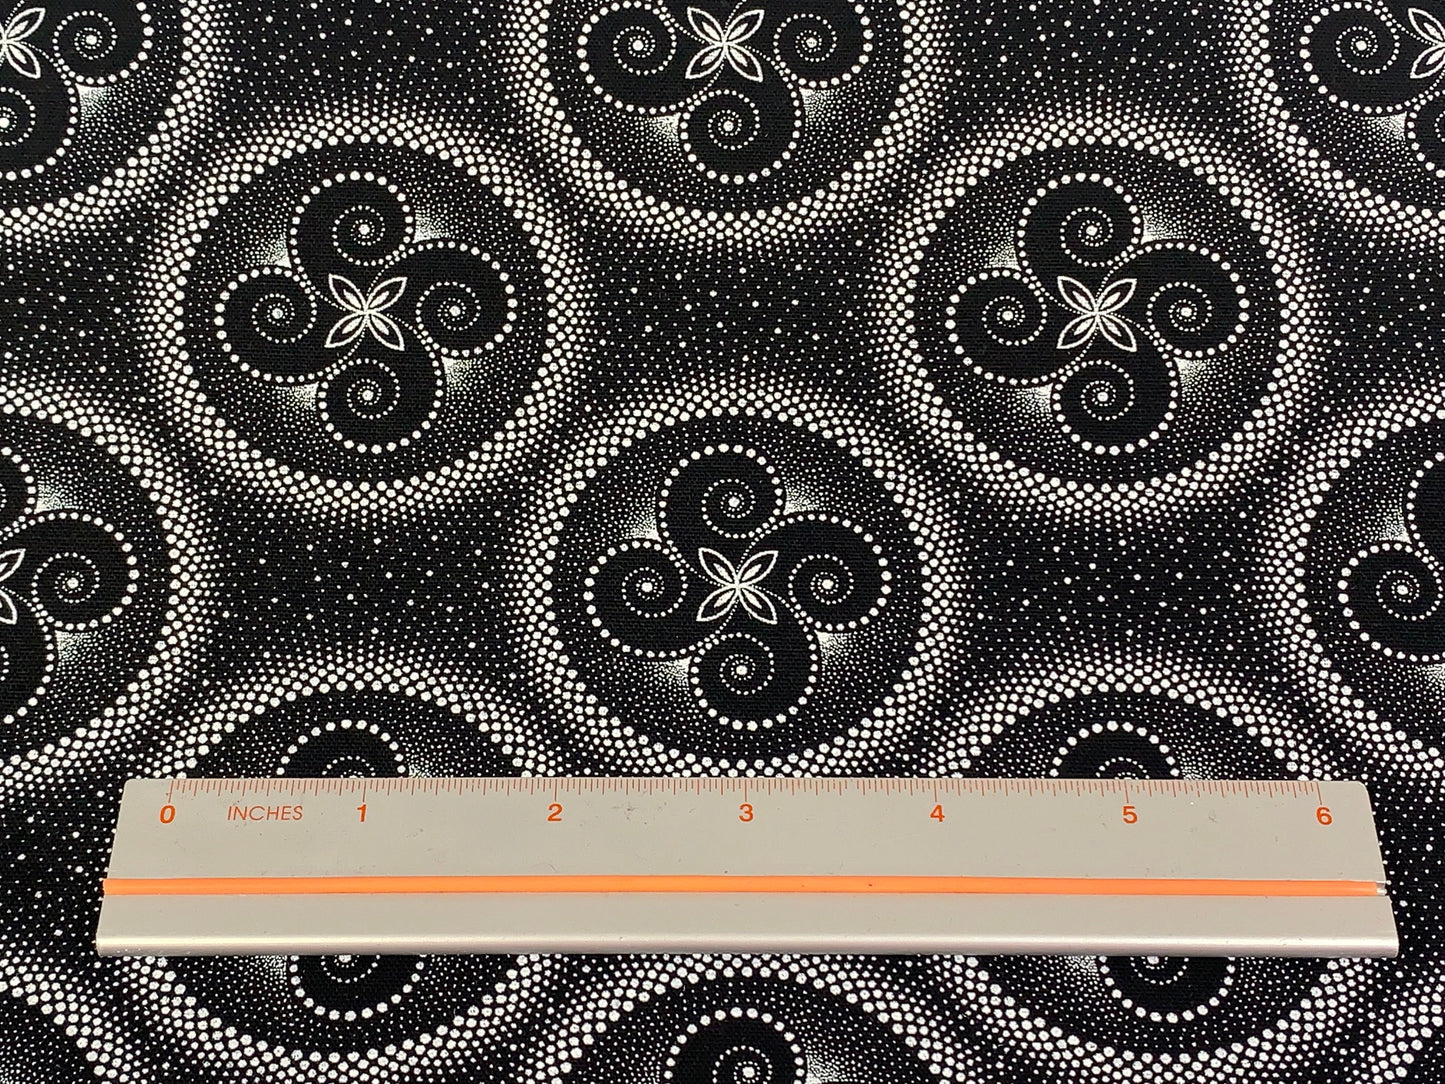 South African Shweshwe Fabric by the YARD. DaGama 3 Cats Black & White Circle Dance. 100% Cotton Fabric for Quilting, Apparel, Home Decor